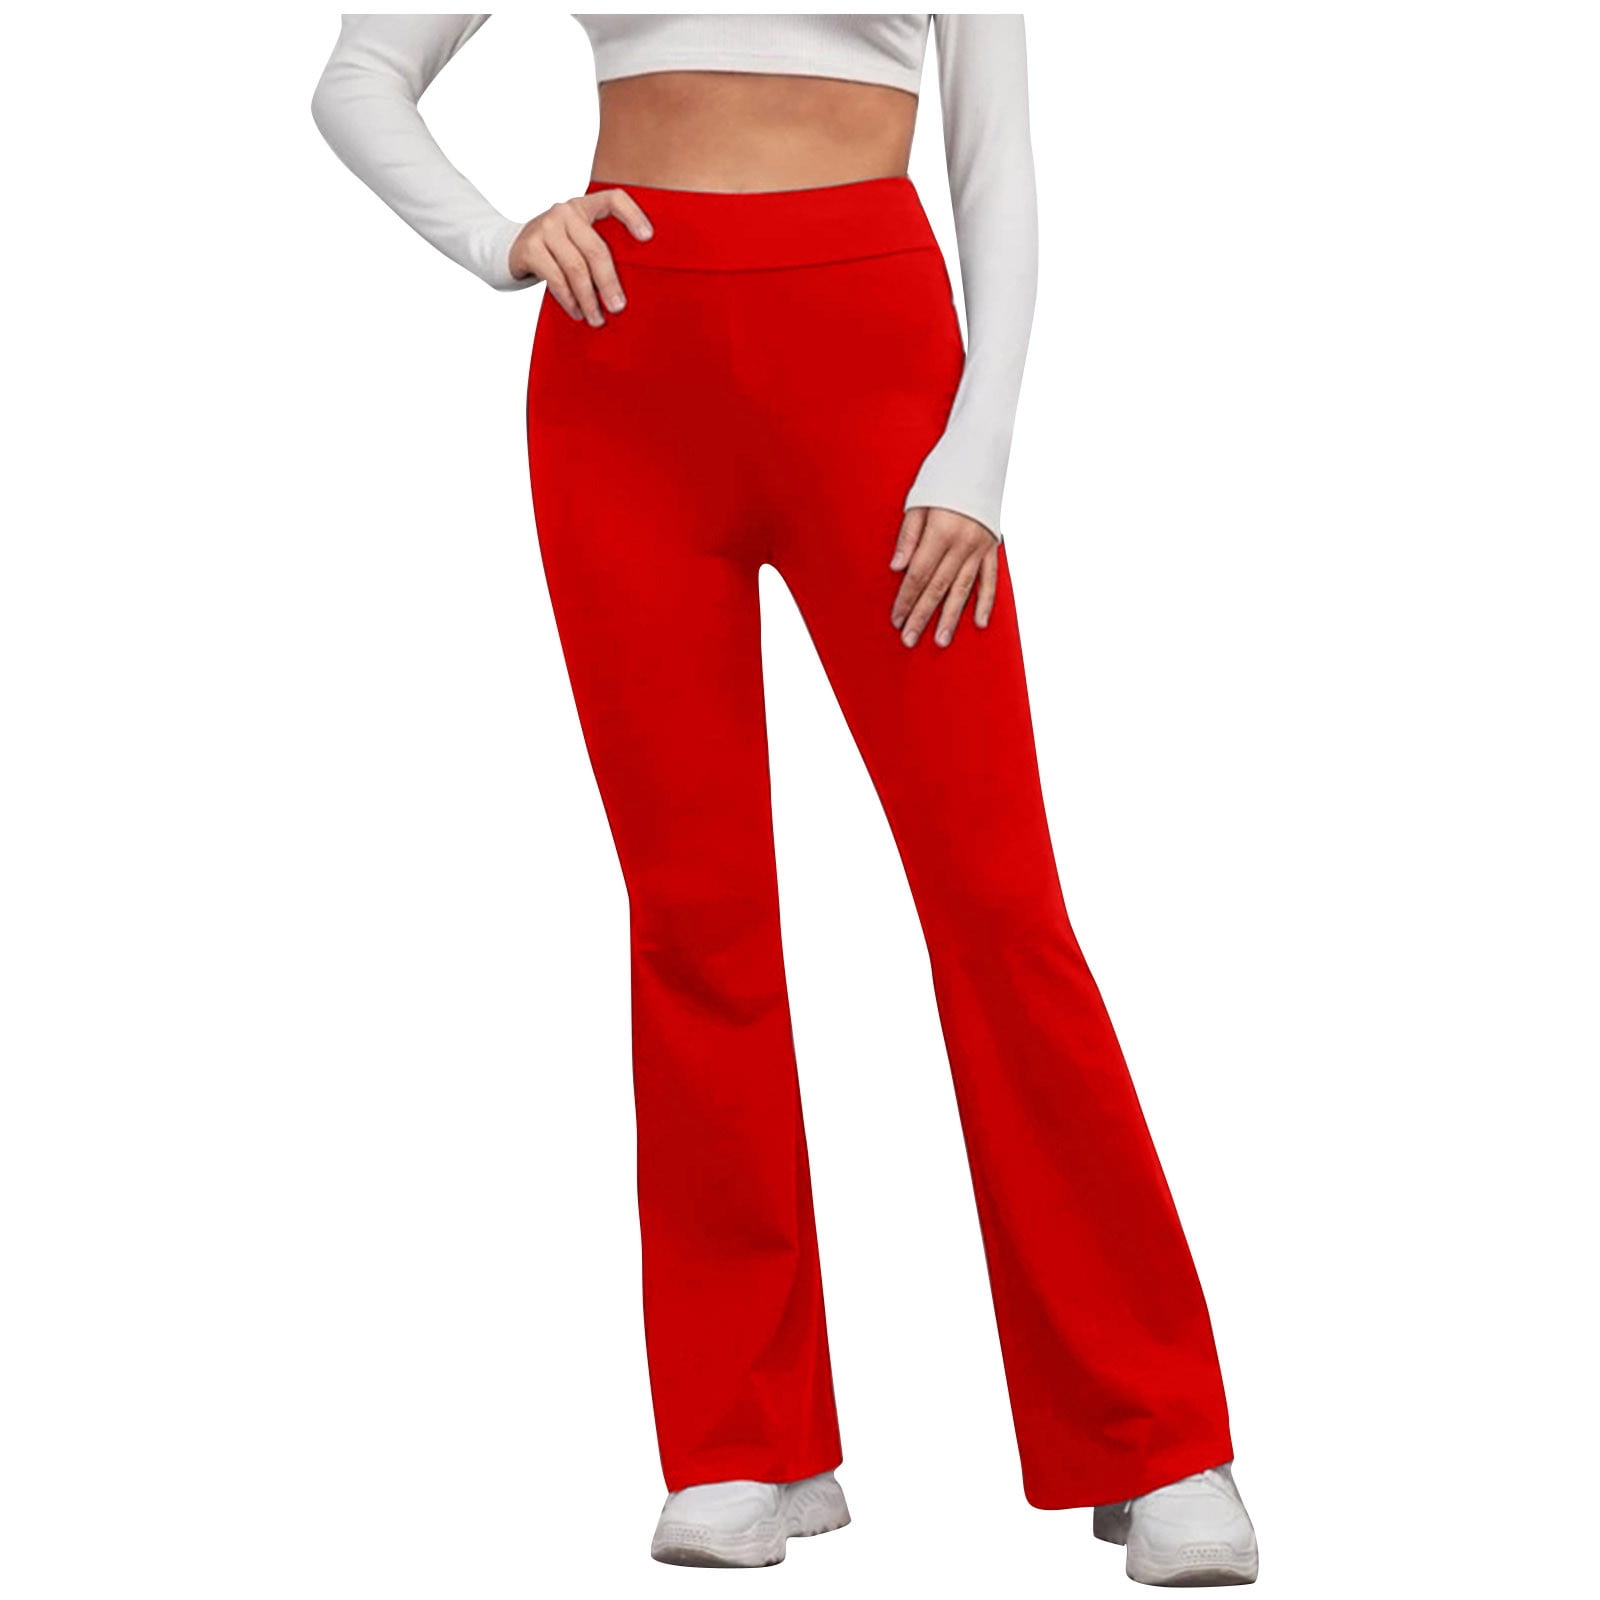  Women's Knit Yoga Flared Sweatpants Elastic High Waisted Flare  Leg Workout Trousers Fold Over Waist Solid Color Slim Fit Lounge Bell  Bottom Long Pants Loungwear : Clothing, Shoes & Jewelry